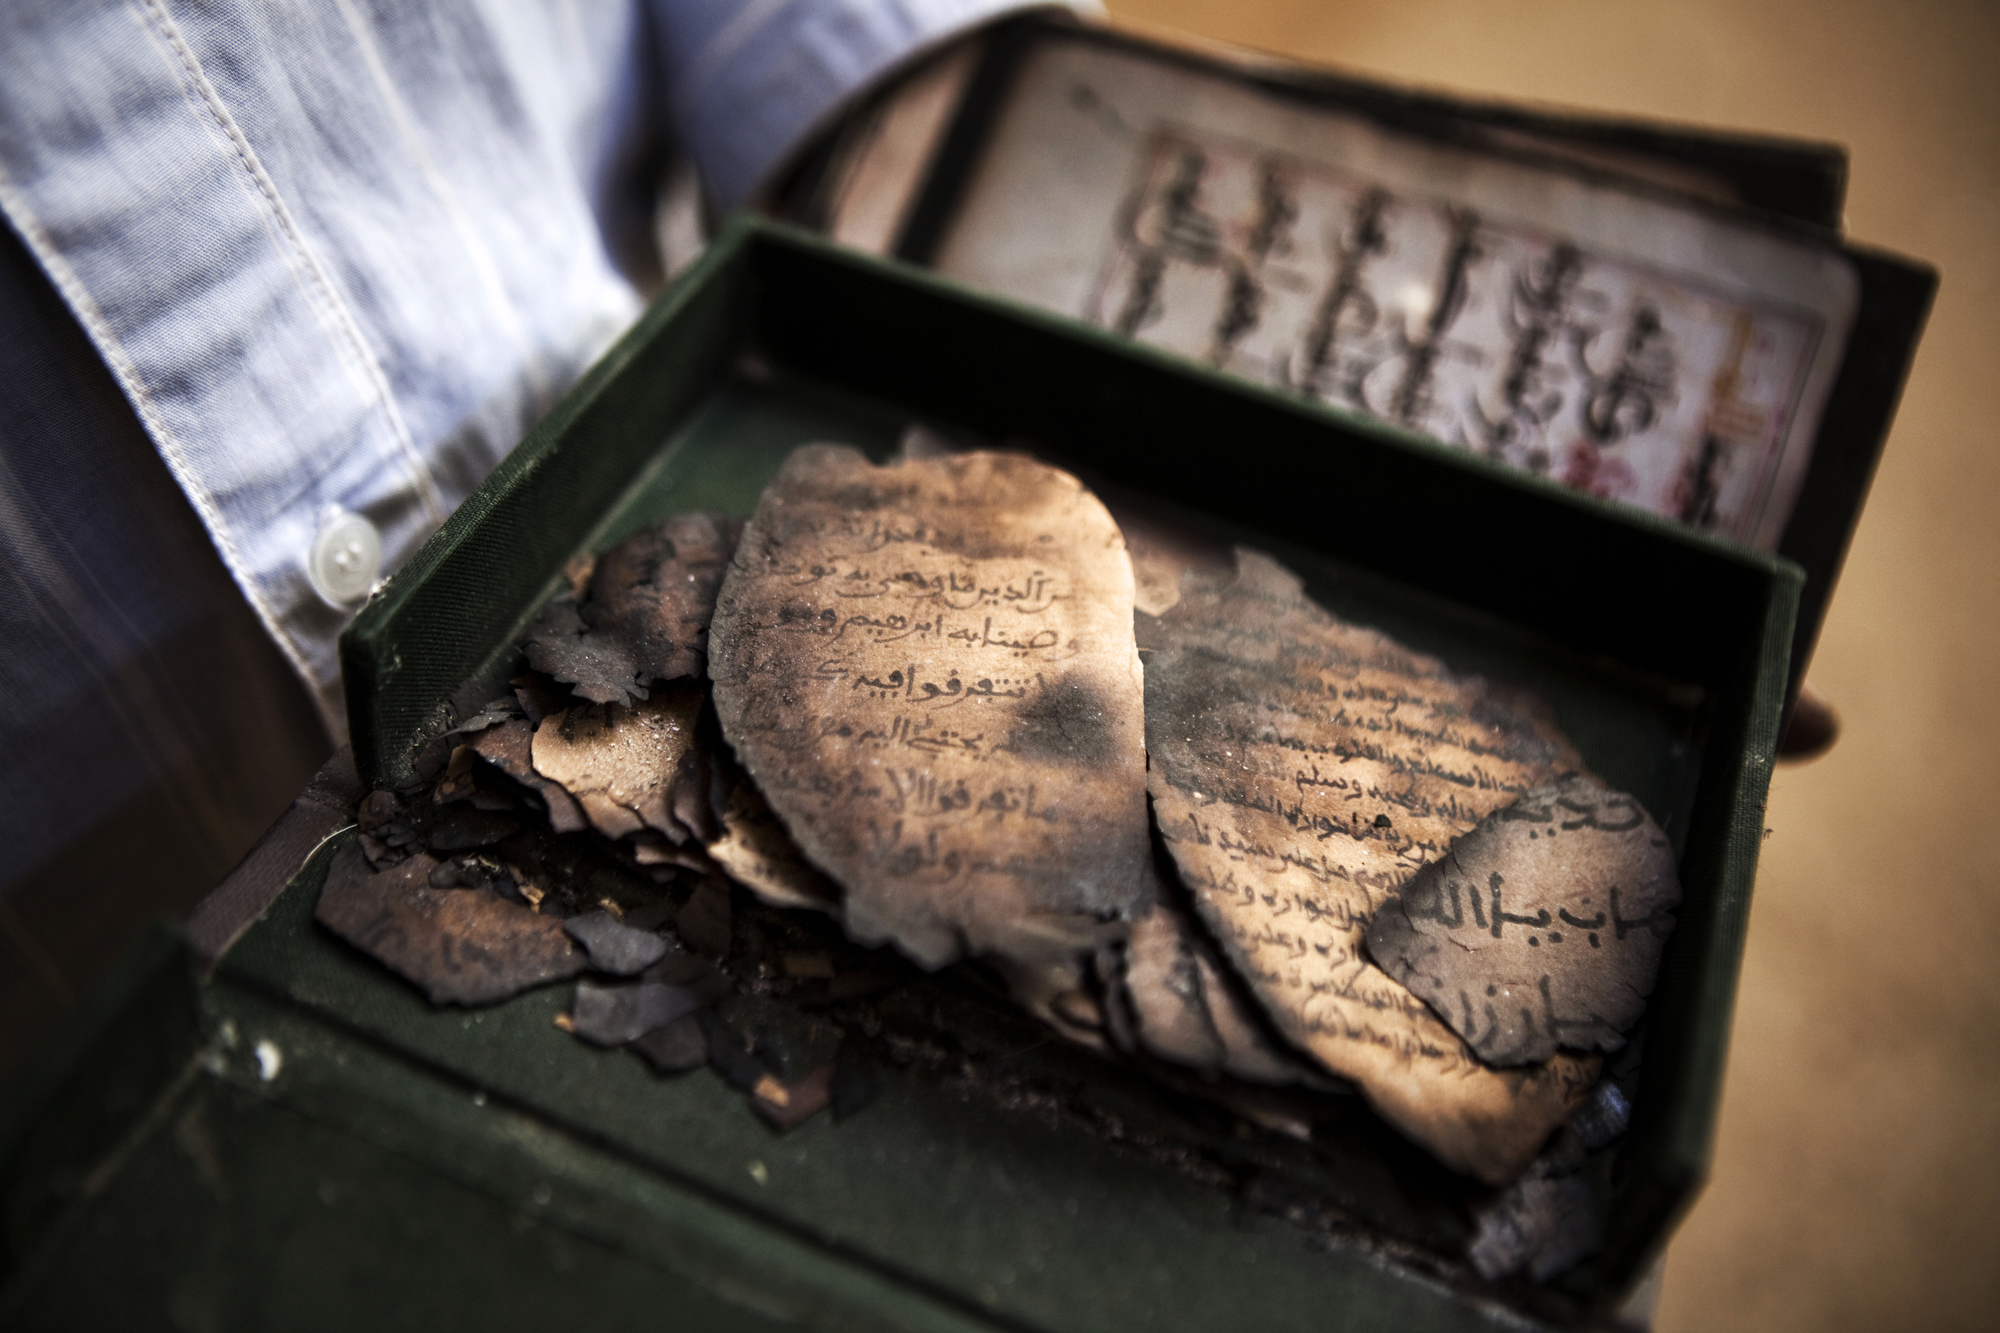  TIMBUKTU, Mali. OCTOBER 2013. The remains of destroyed manuscripts at the Ahmed Baba Institute of Higher Learning and Islamic Research in Timbuktu, Mali. The institute was home to thousands of manuscripts that were destroyed by Jihadists, who used i